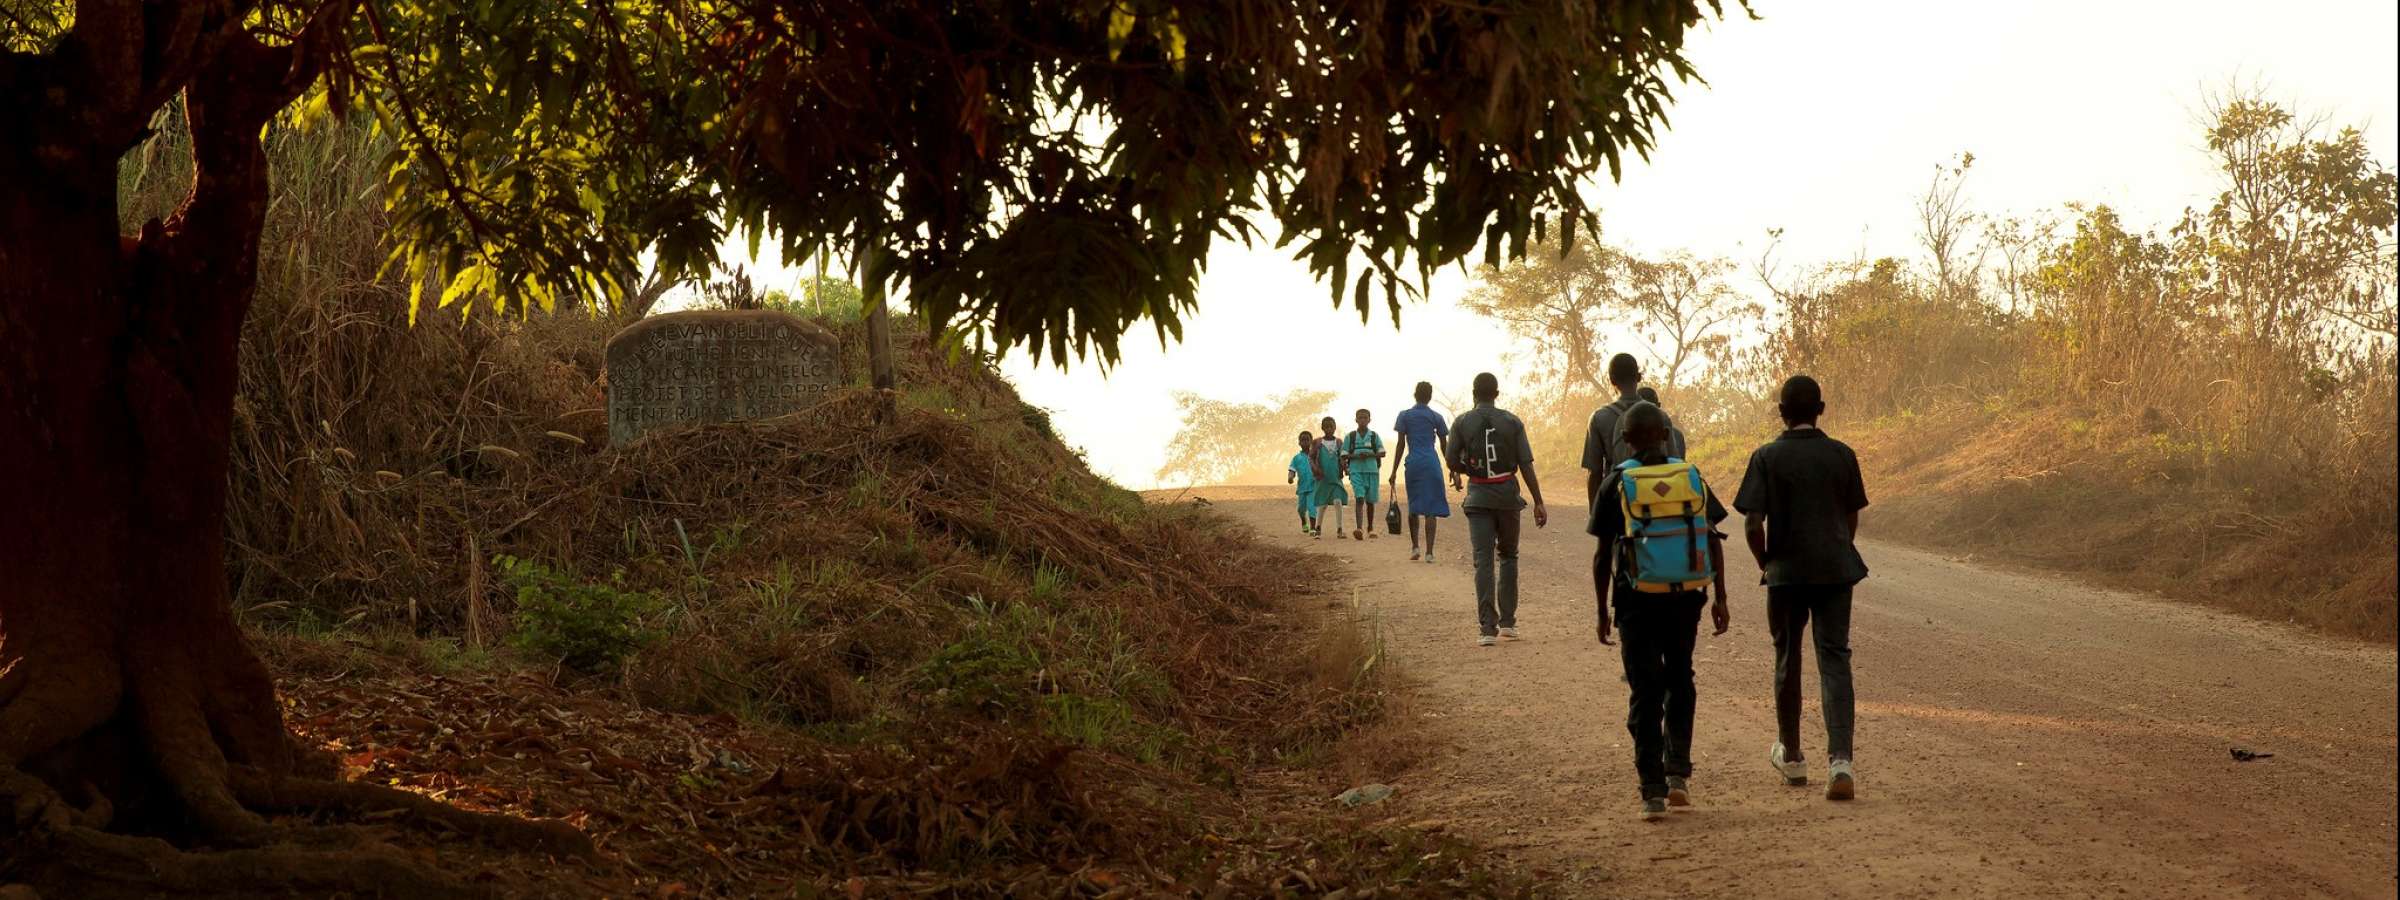 Cameroon. Children walk to school in the morning in the town of Yoko.